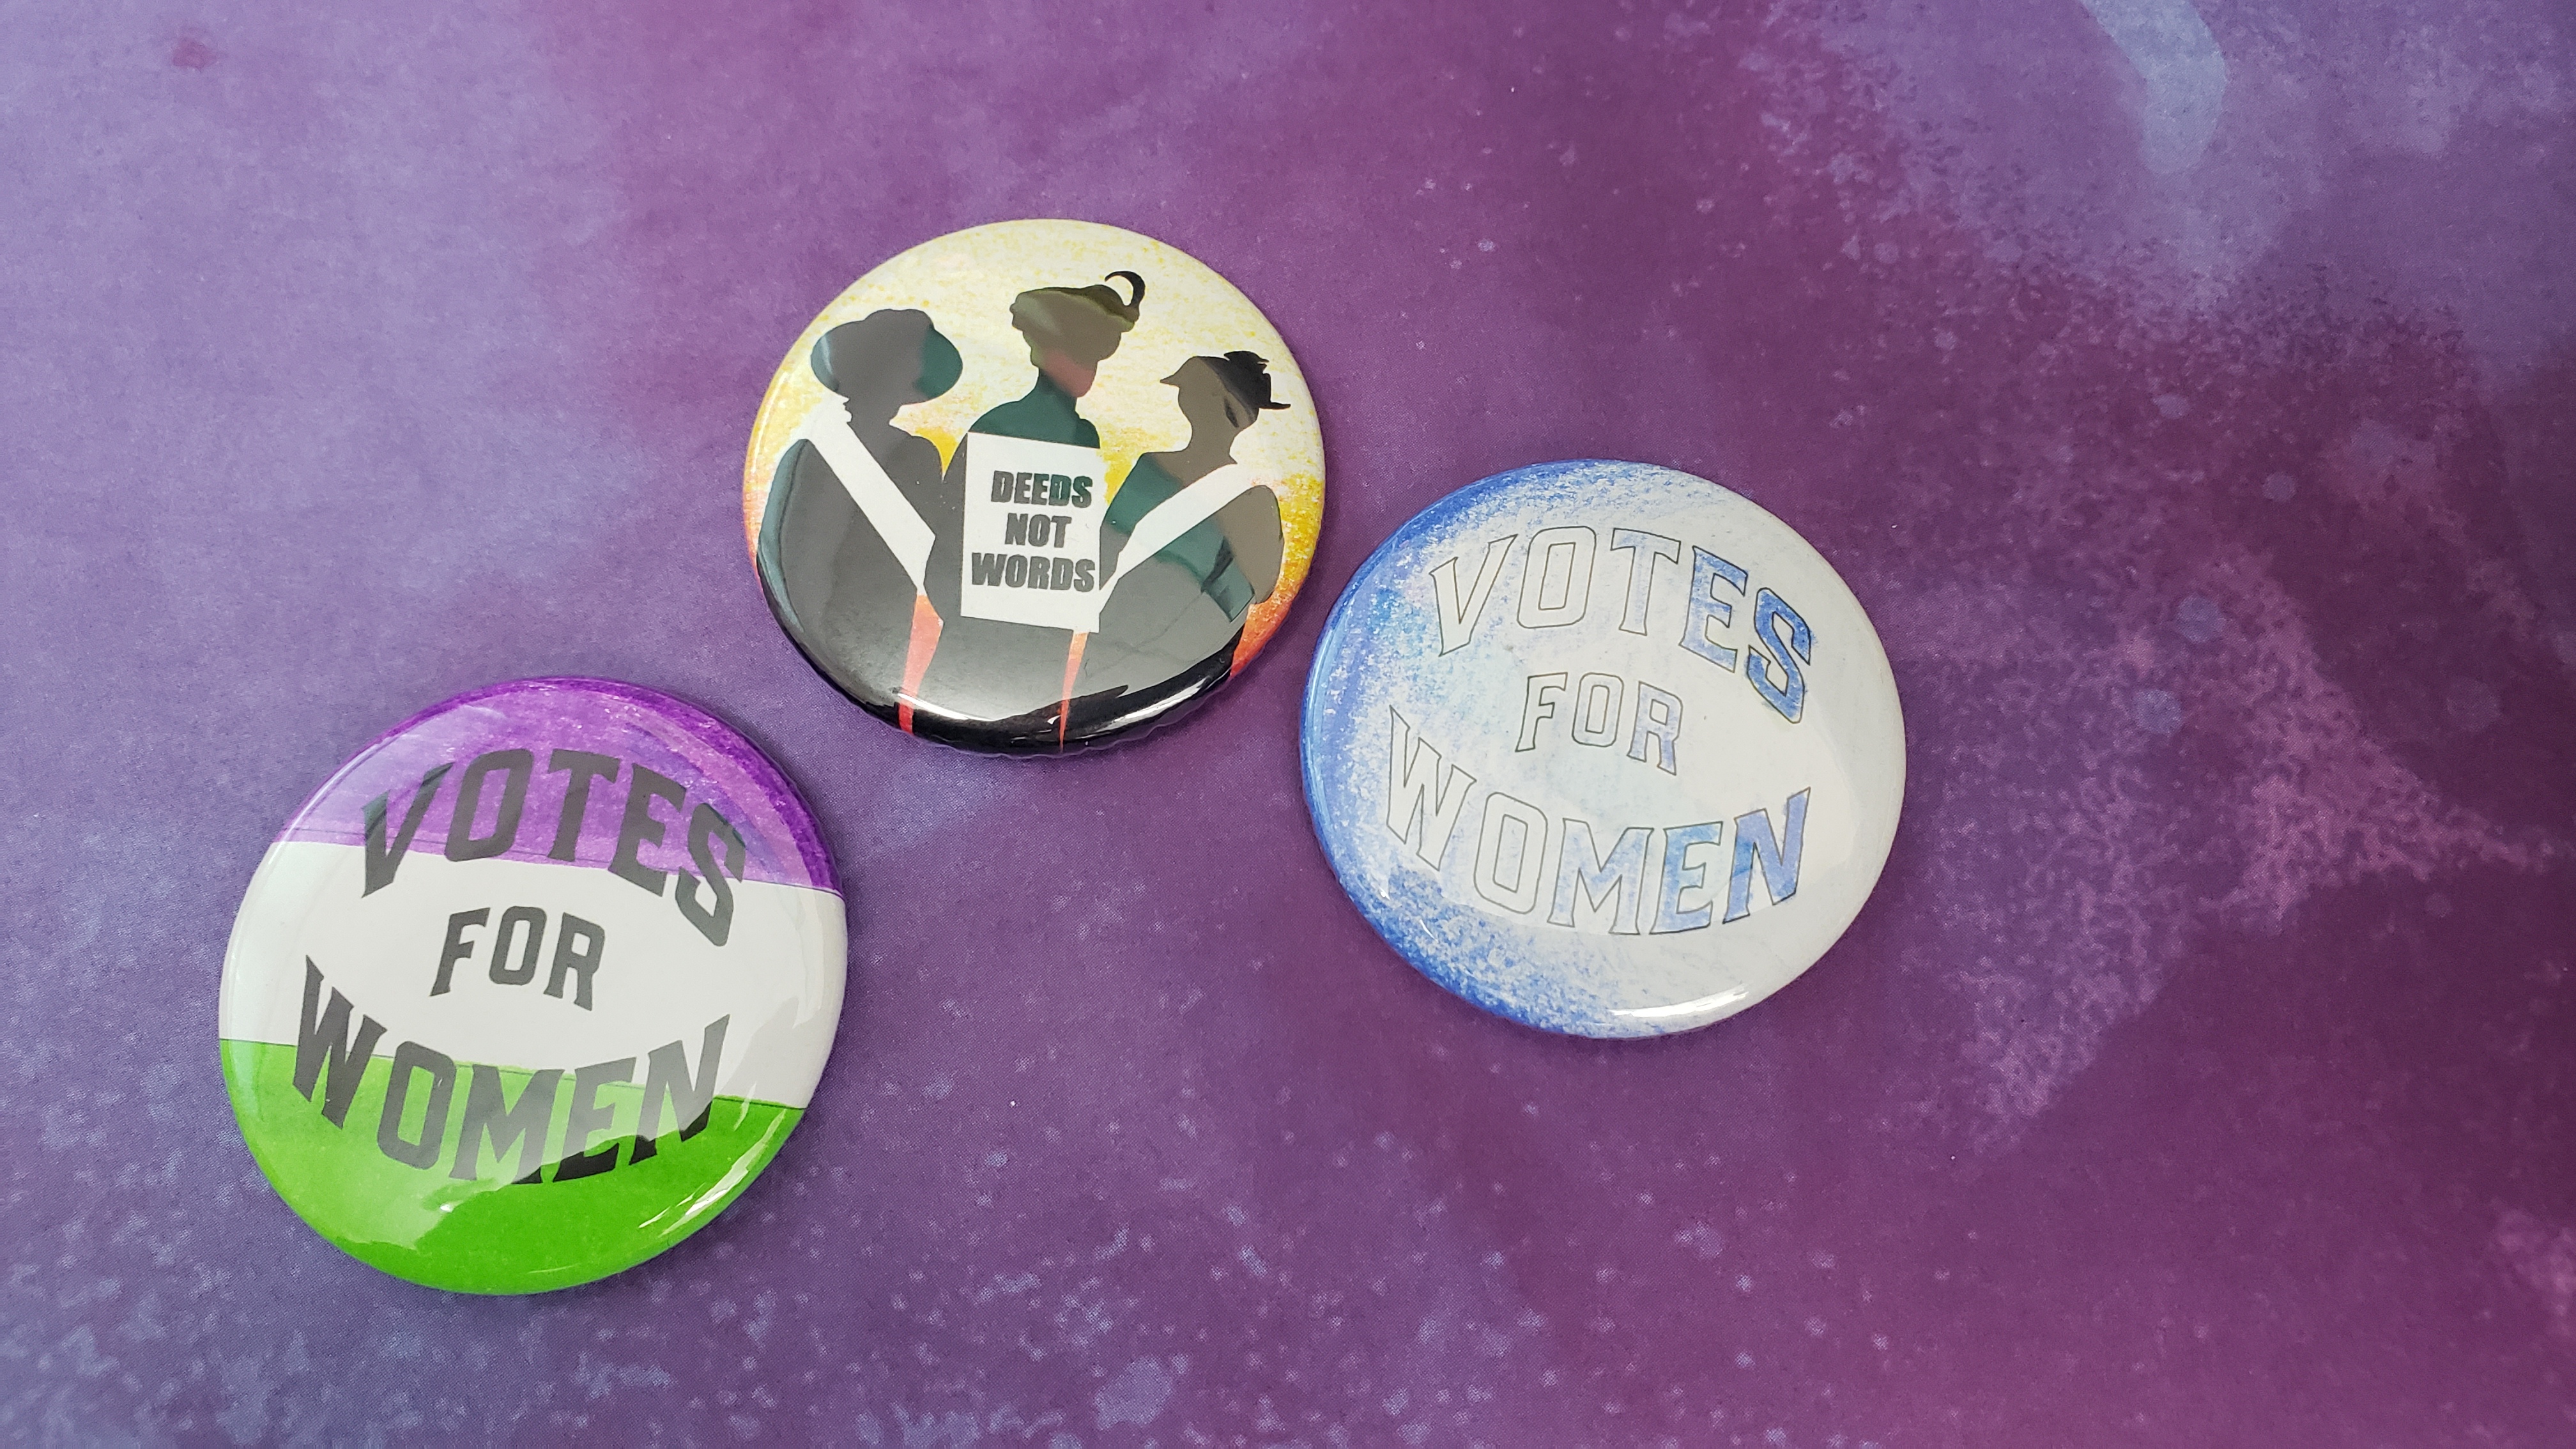 buttons with suffrage sayings "Votes for Women" and "Deeds not Words"